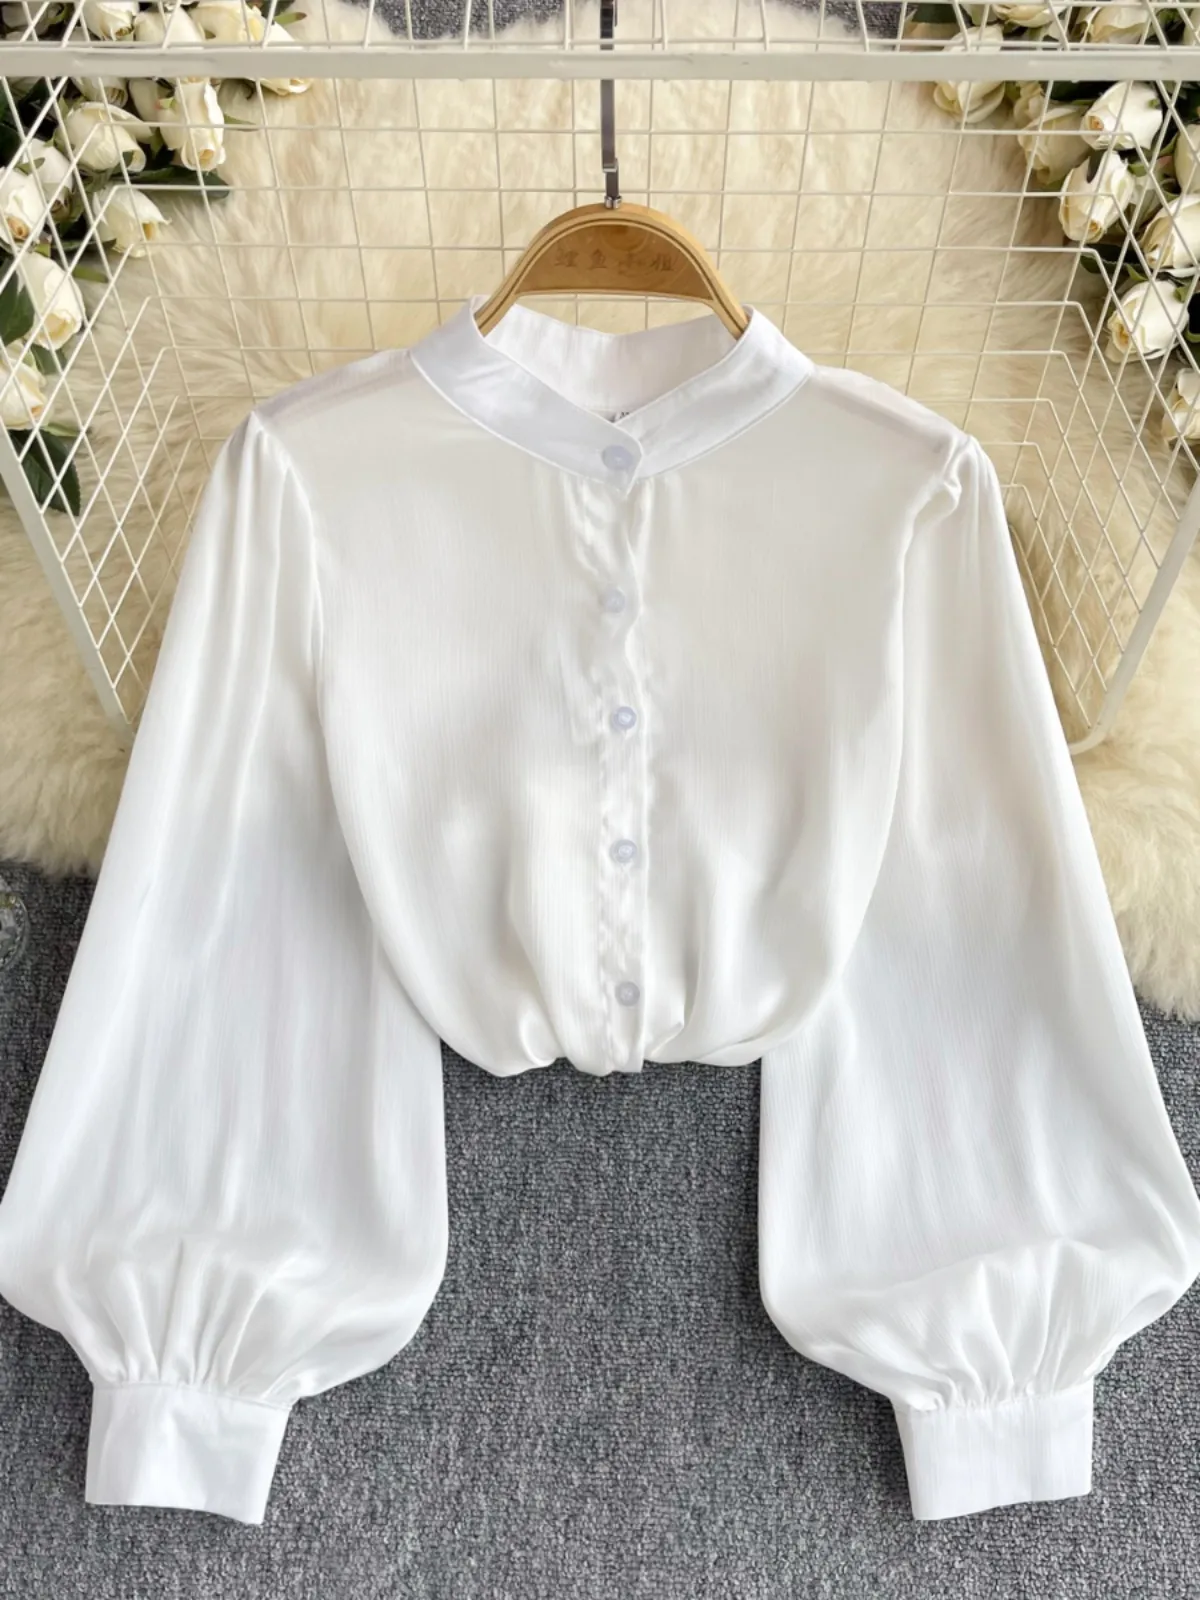 High end white shirt, women's French bubble sleeves, loose and slimming temperament, stand up collar, fashionable and versatile chiffon top, women's spring